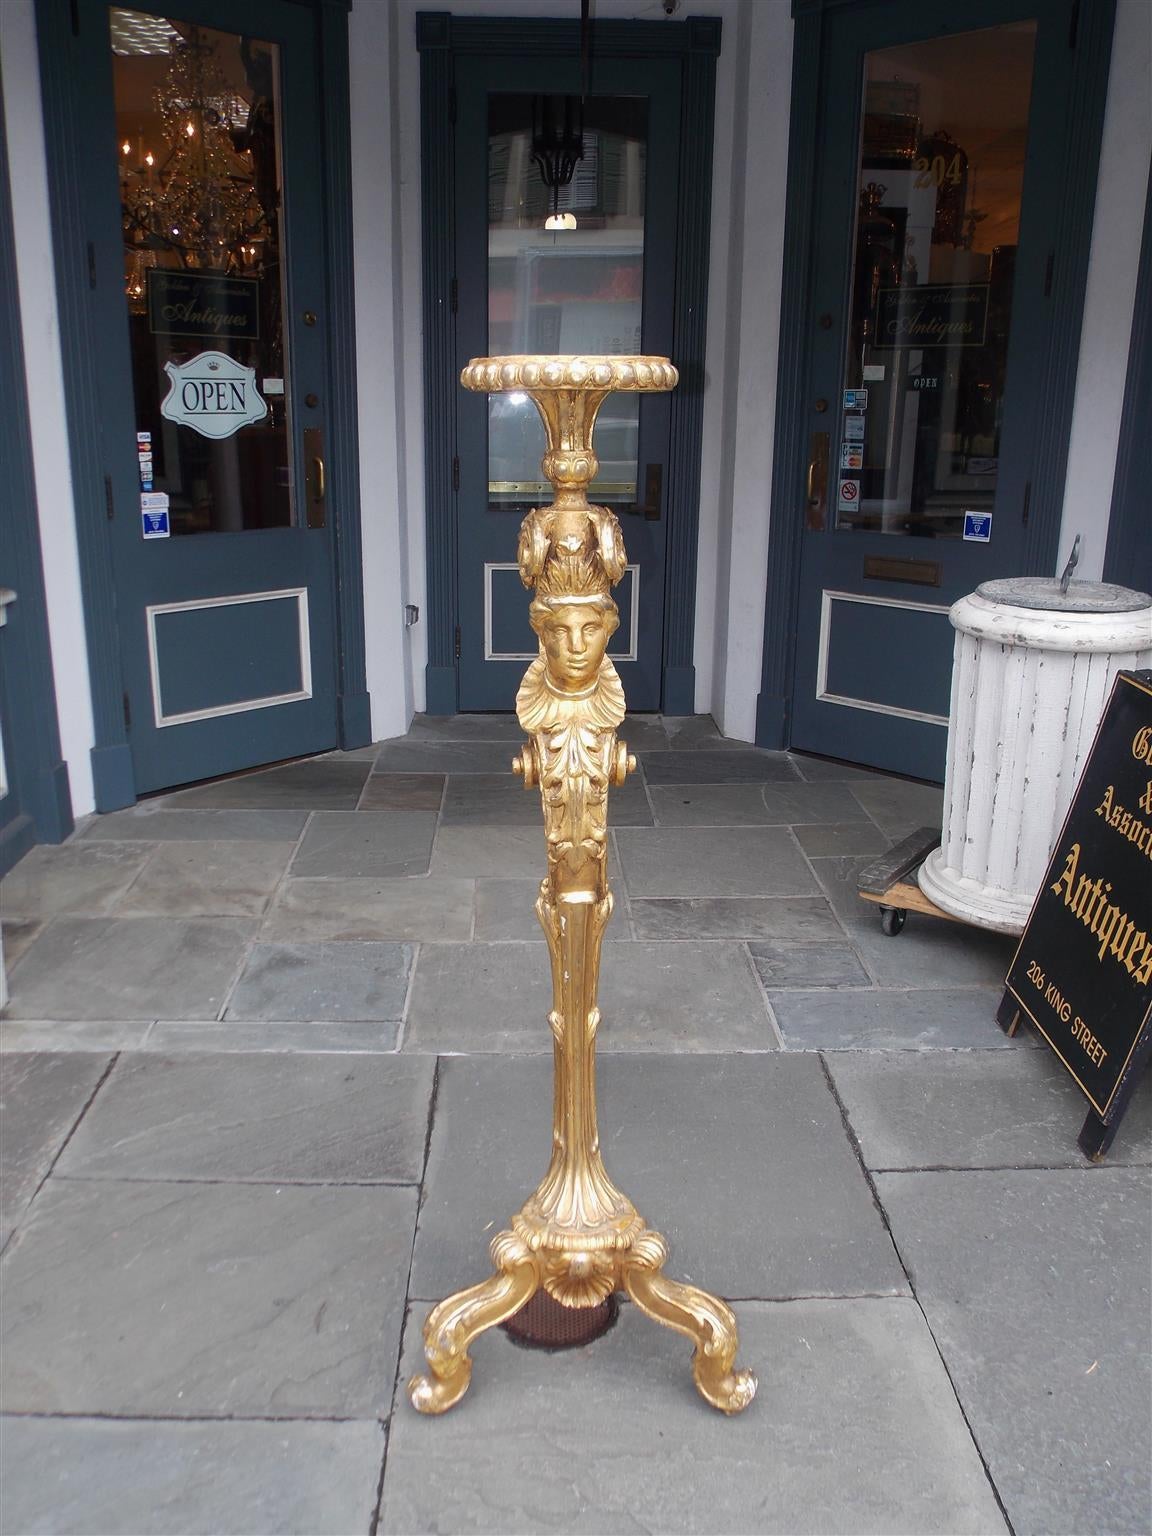 Italian Regency gilt carved wood figural torchiere with egg and dart motif, floral scrolled decorative work, and terminating on floral tripod base with centered shell carving, Late 18th century.